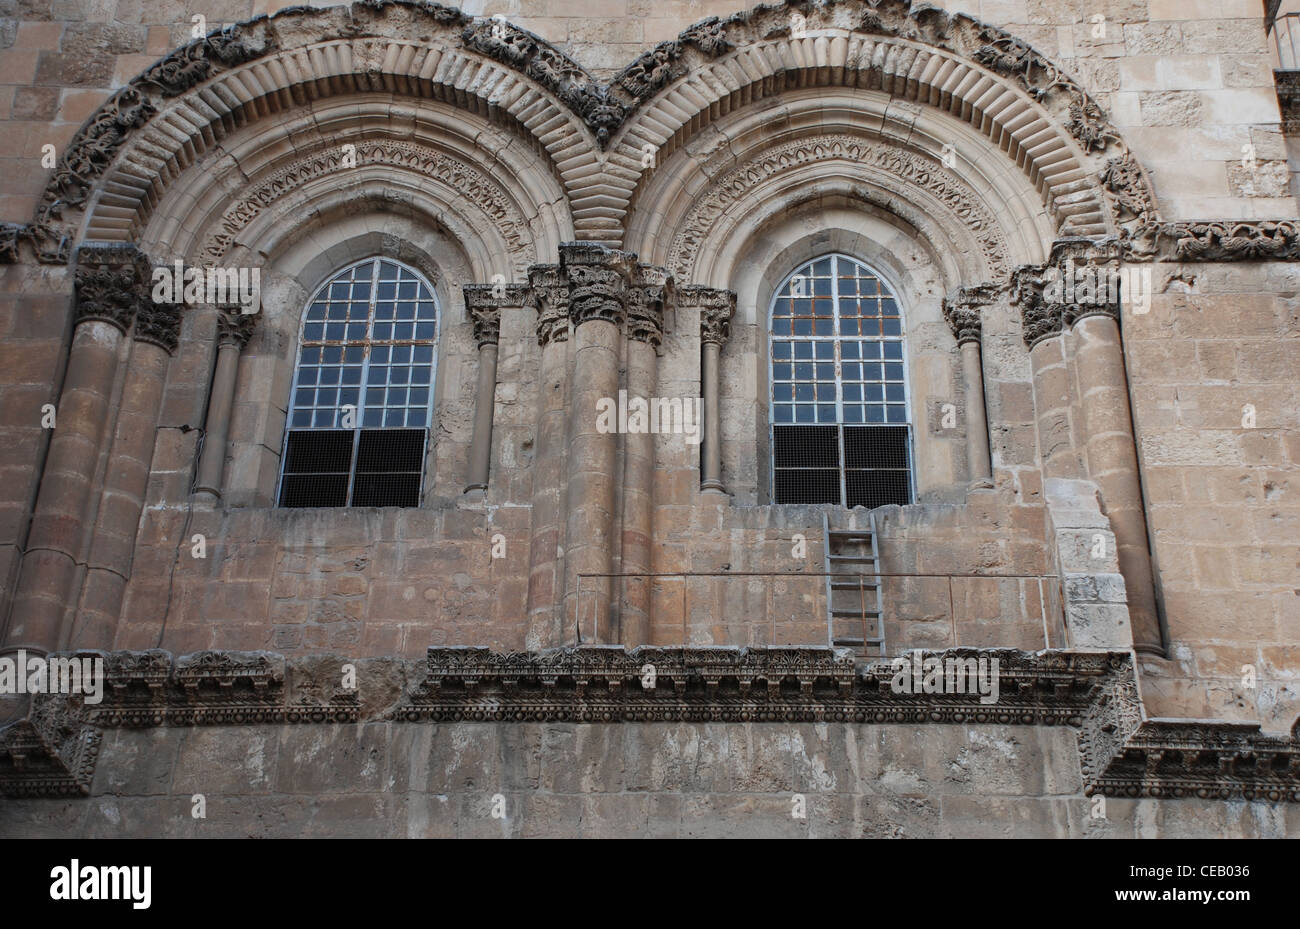 Ladder on window ledge leading to window in the Church of the holy sepulcher Stock Photo